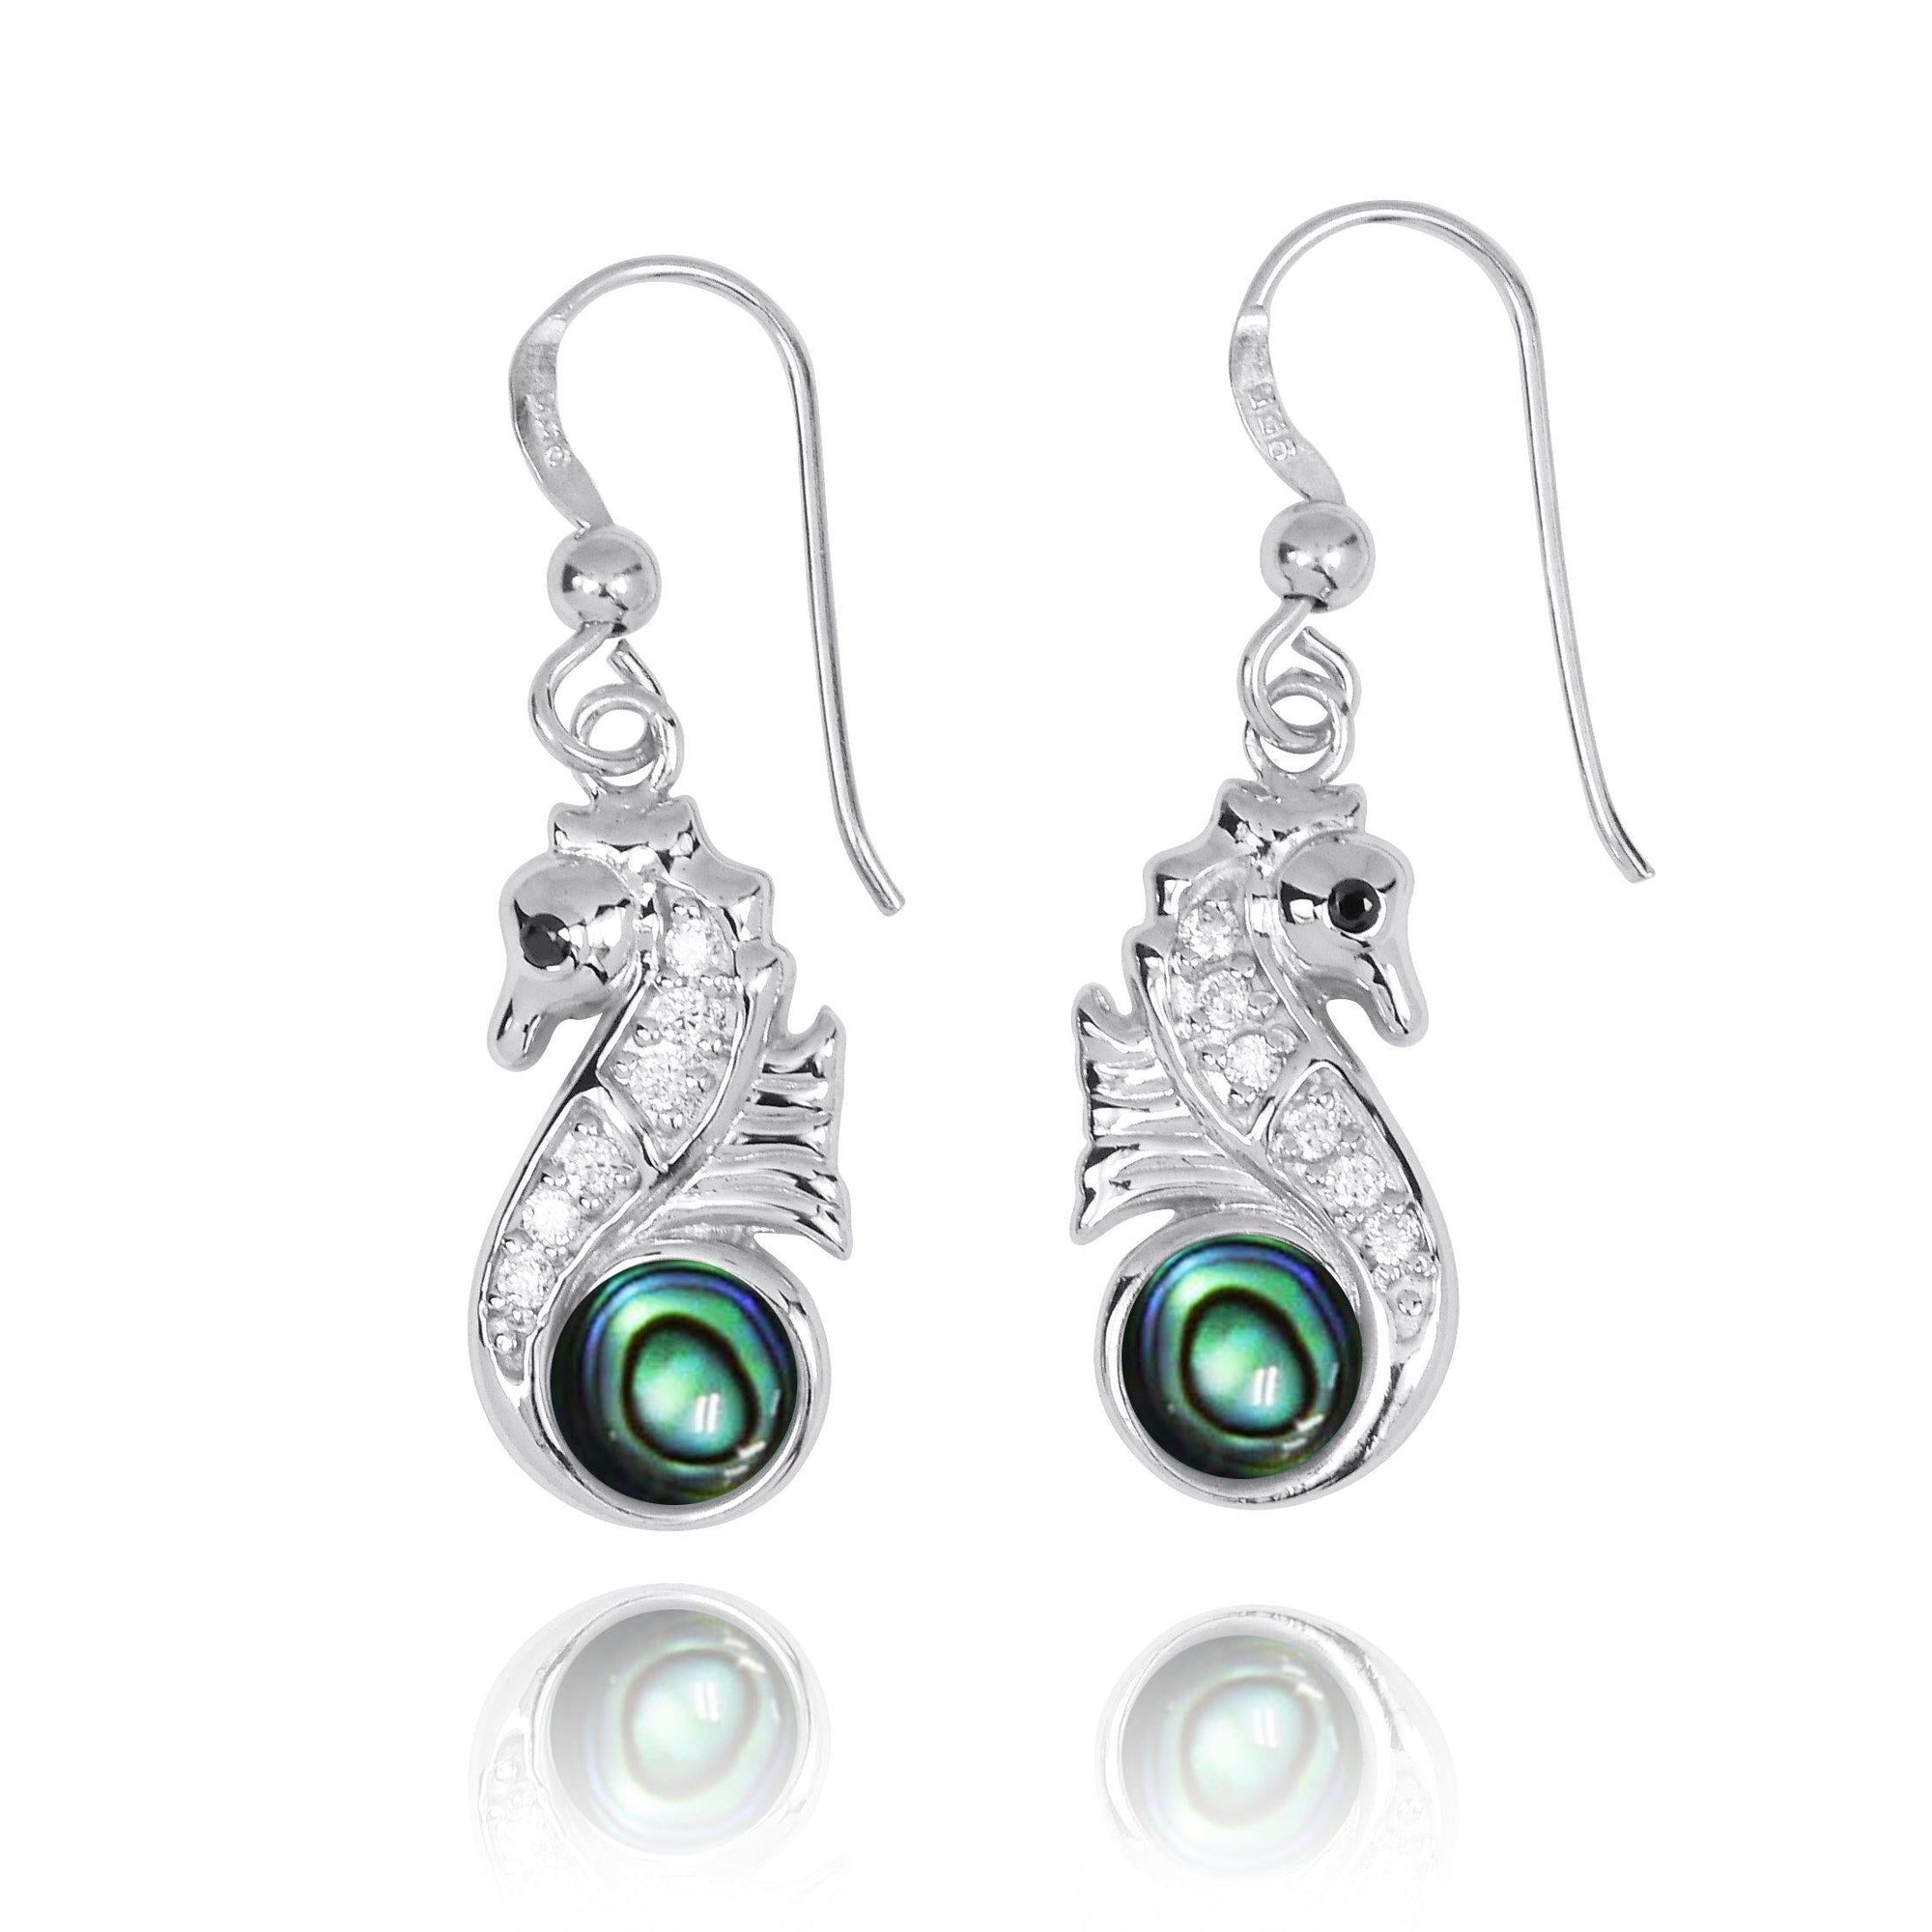 Seahorse Earrings with Abalone Shell - Miami